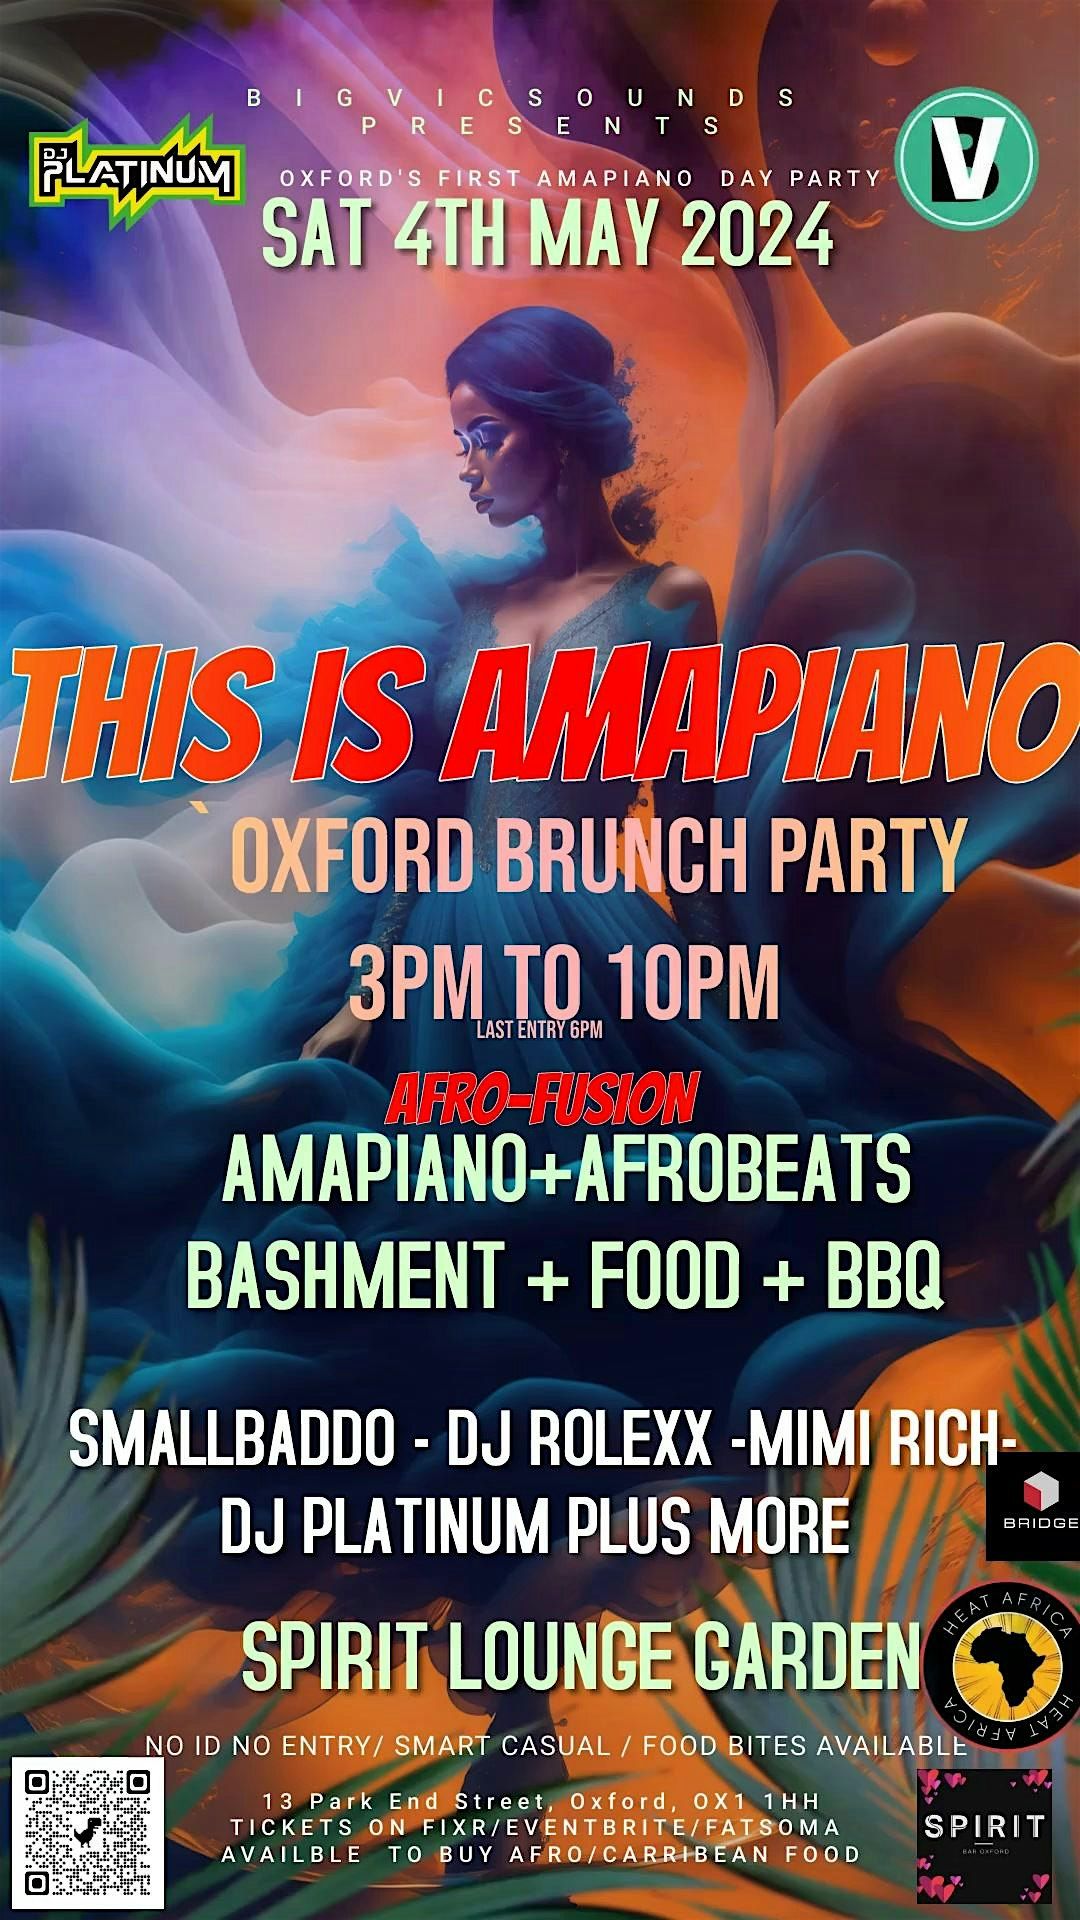 AMAPIANO AFRO-FUSION BRUNCH OXFORD DAY PARTY